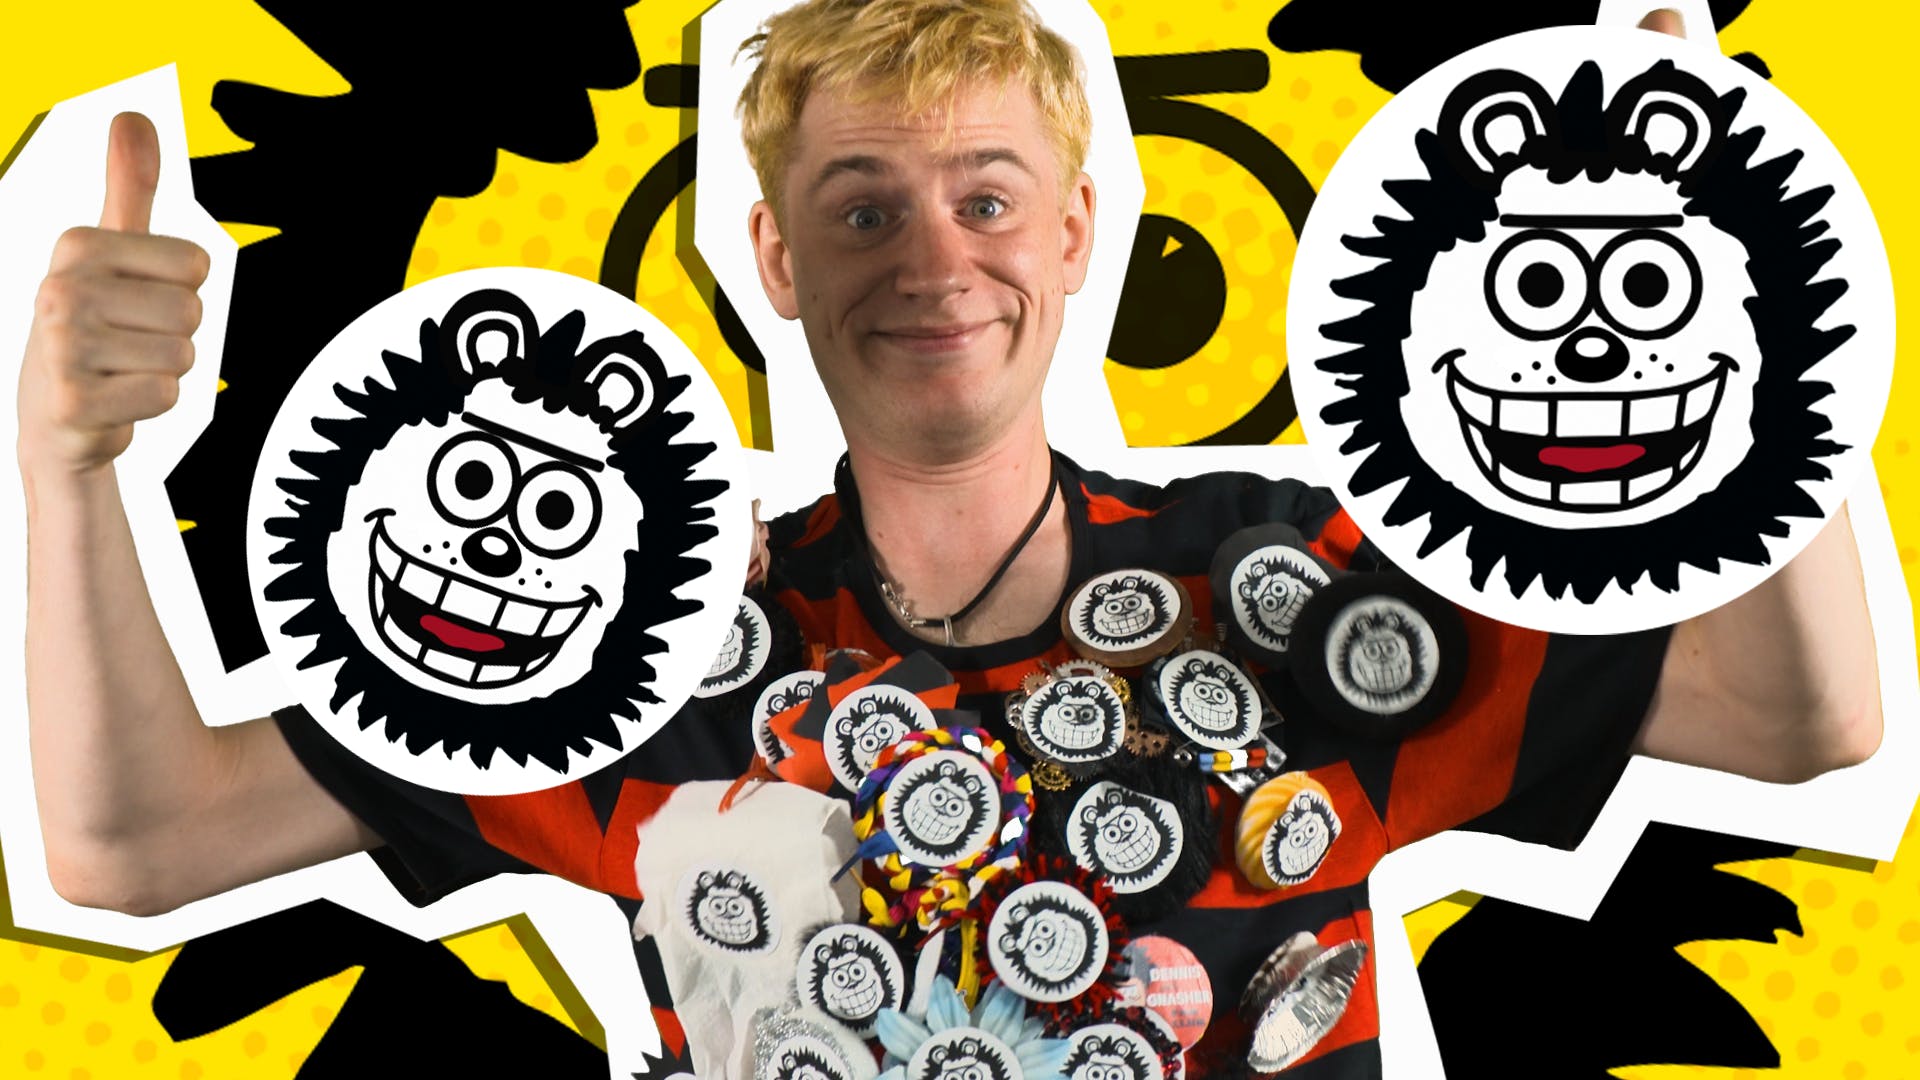 Make Your Own Gnasher Badge!